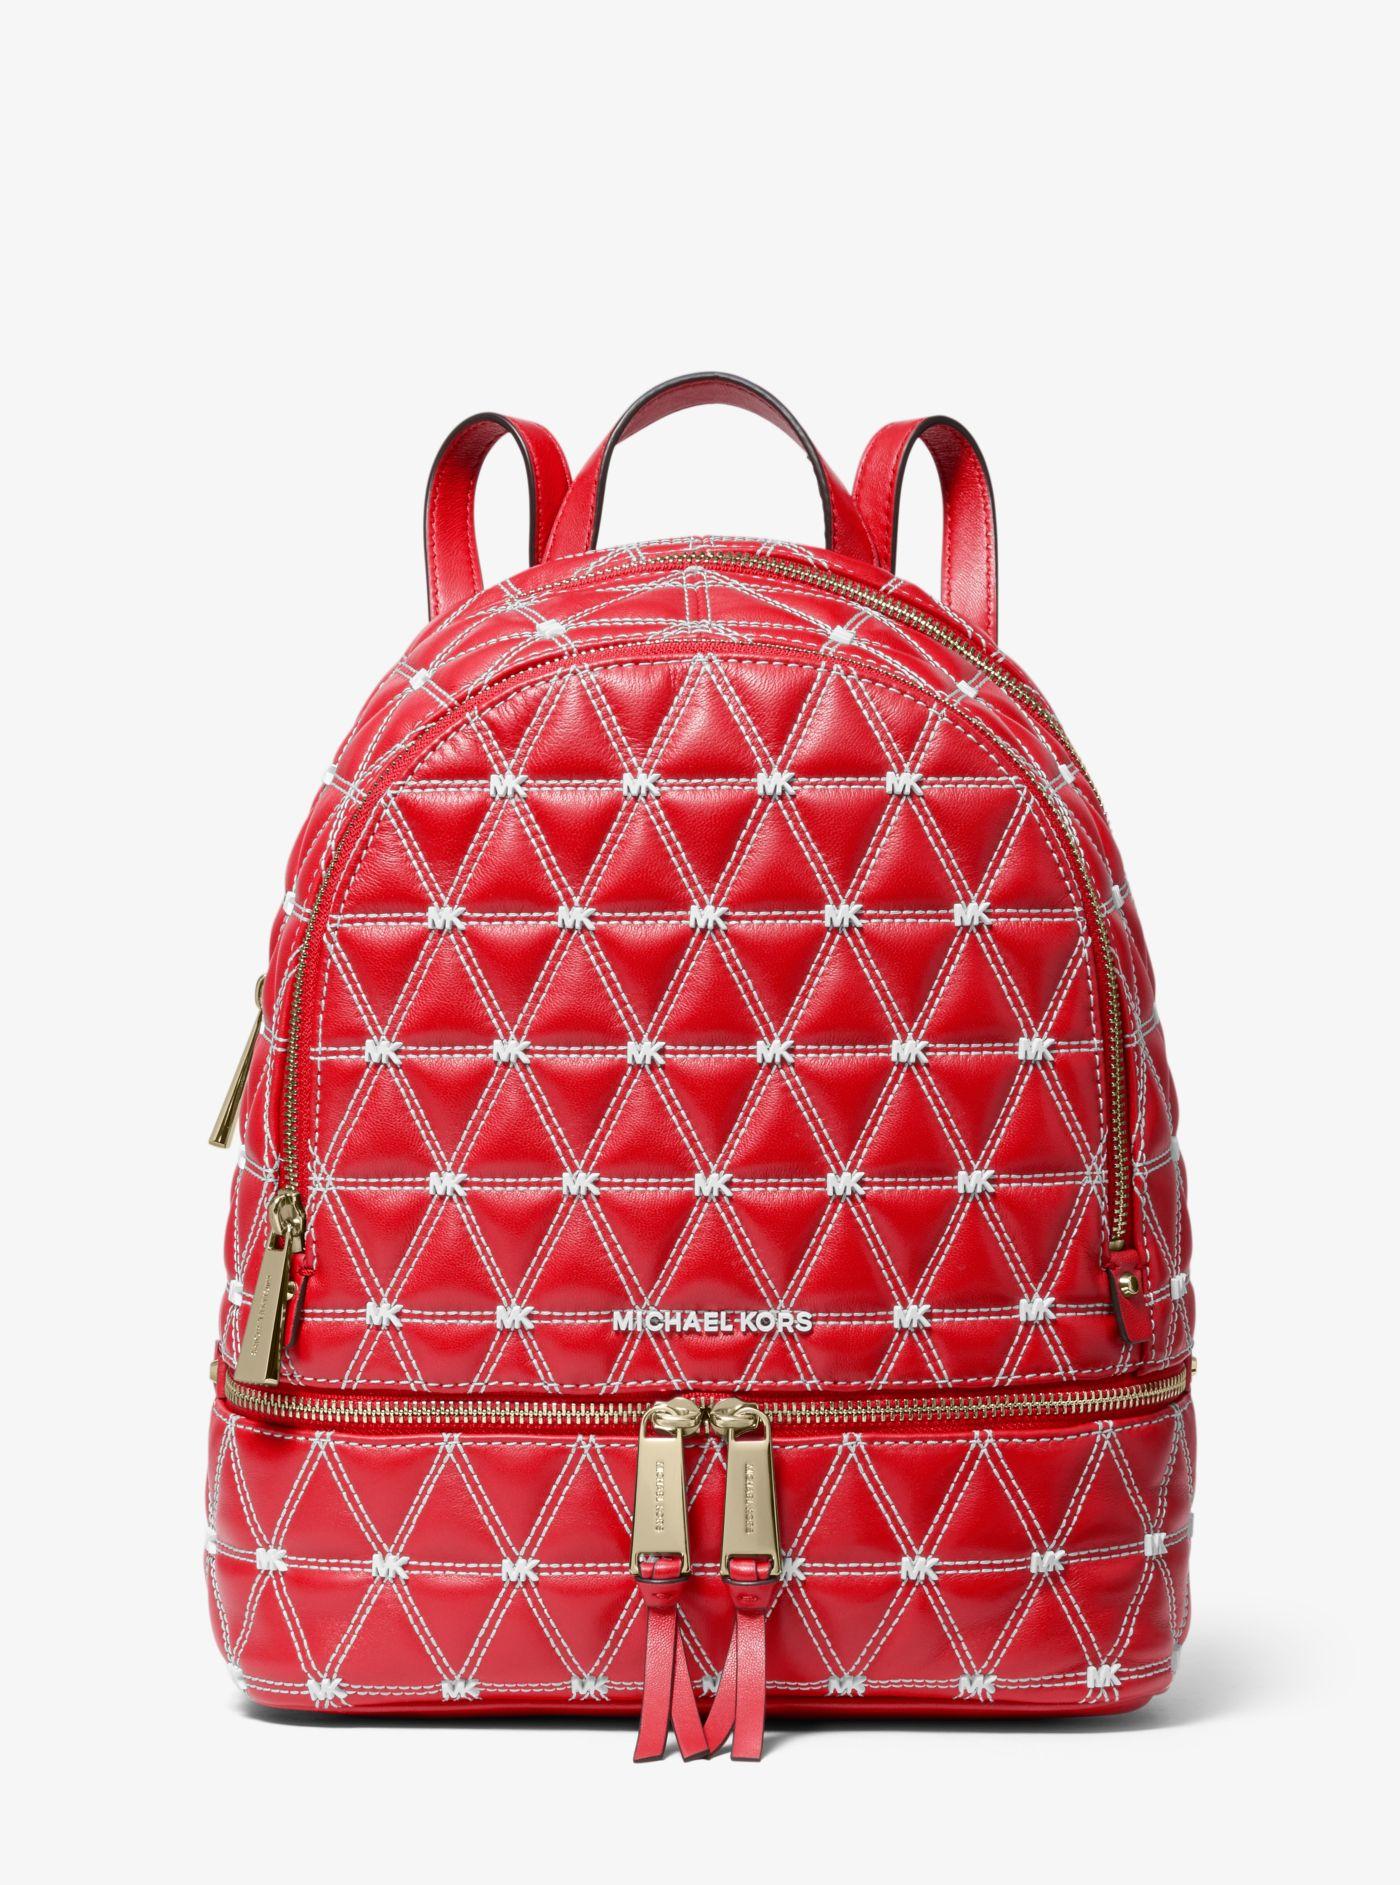 Michael Kors Rhea Medium Quilted Leather Backpack in Bright Red (Red) - Lyst